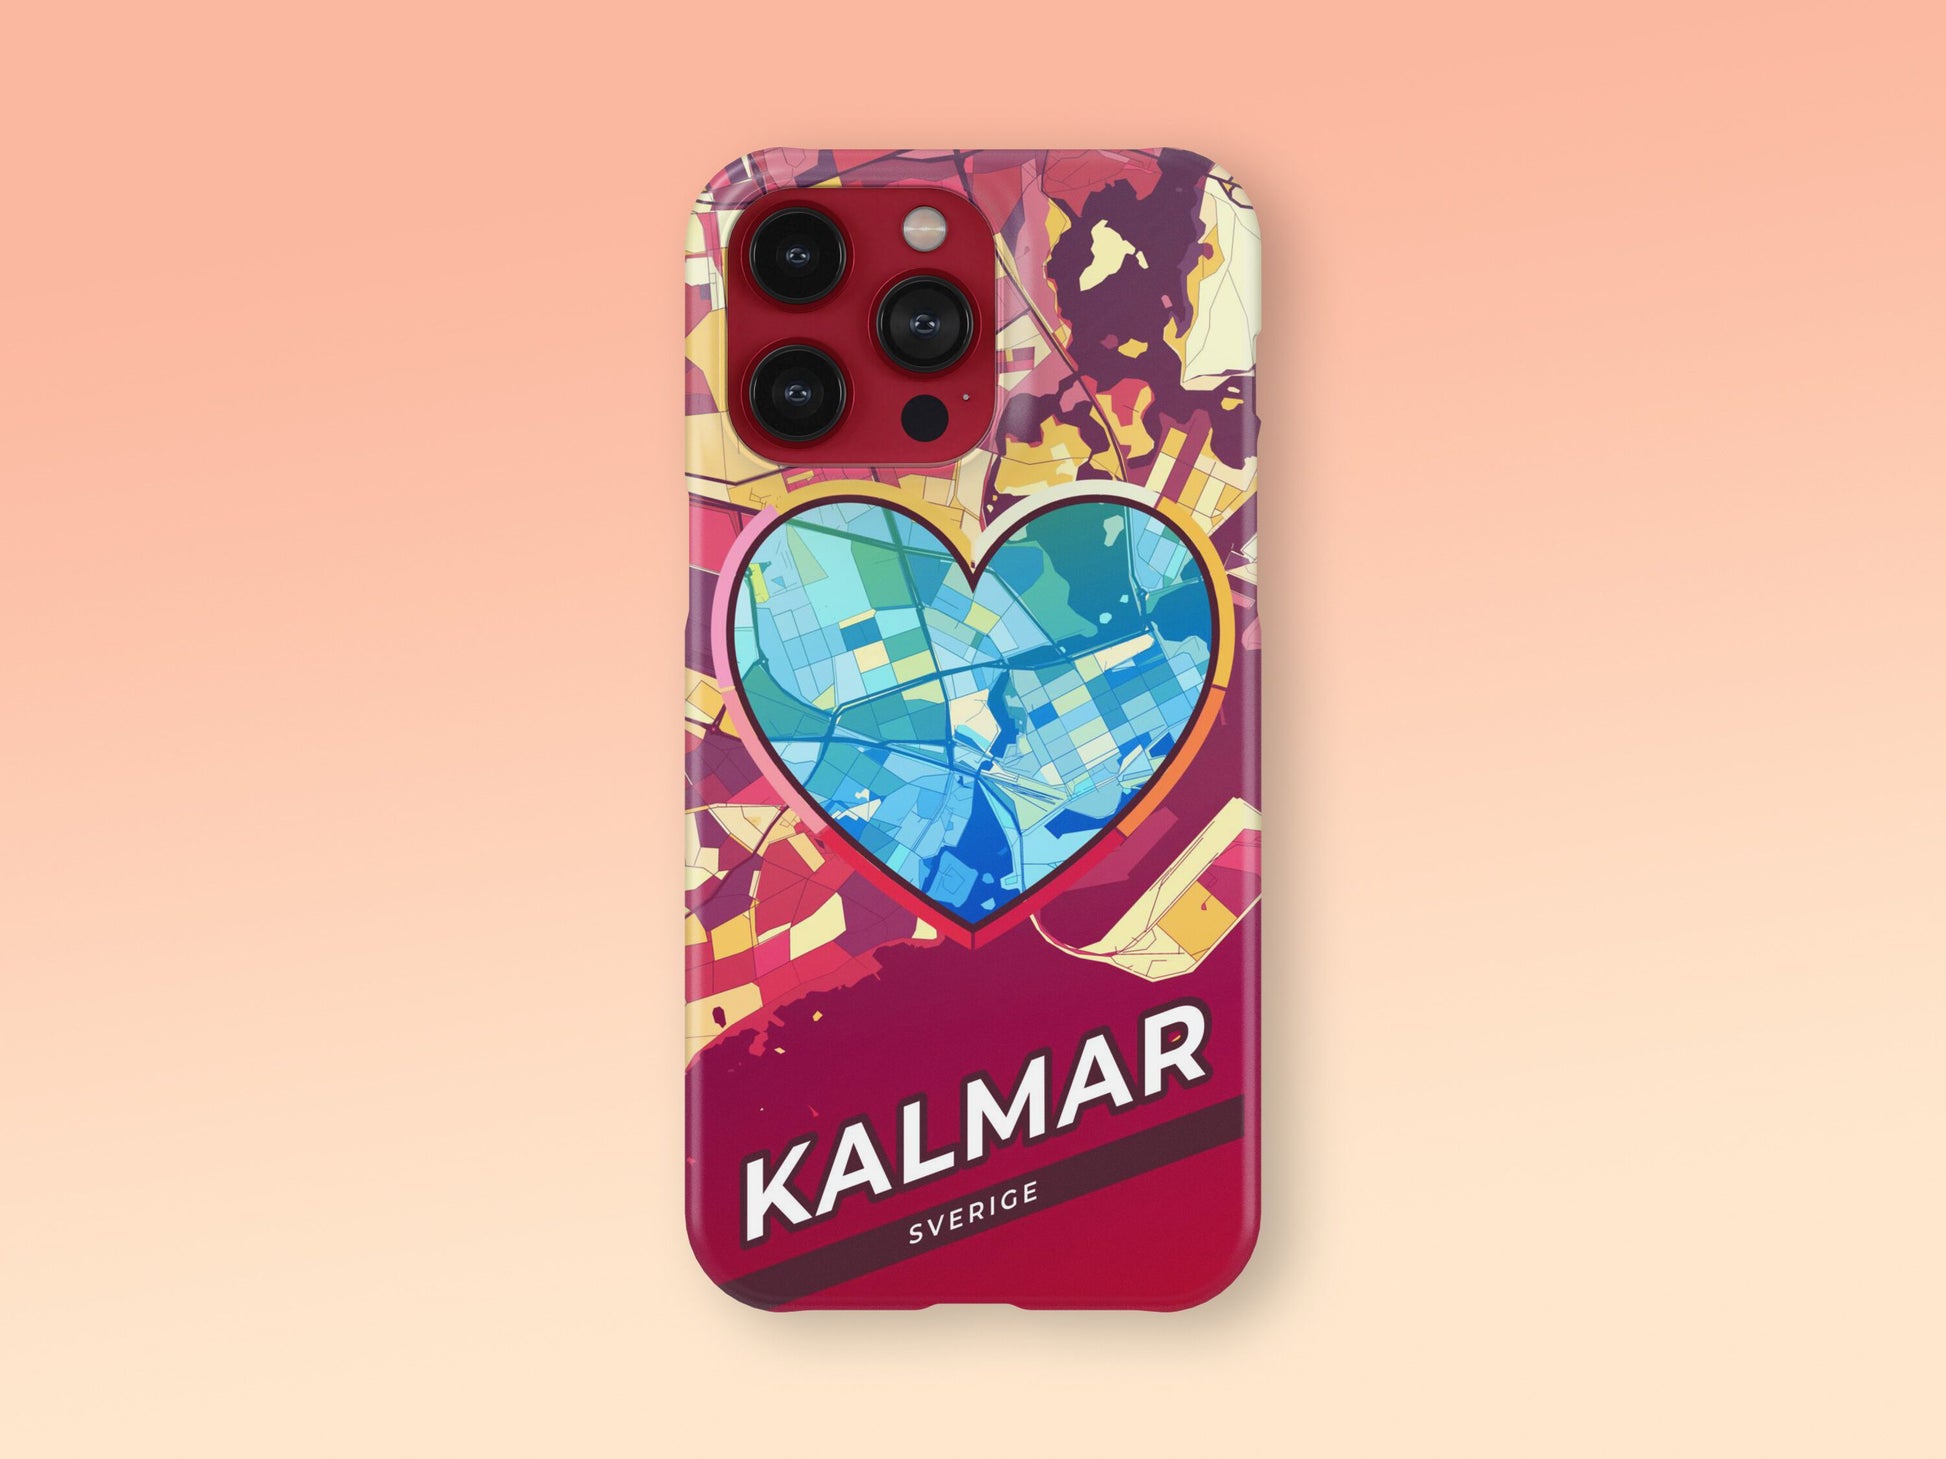 Kalmar Sweden slim phone case with colorful icon. Birthday, wedding or housewarming gift. Couple match cases. 2